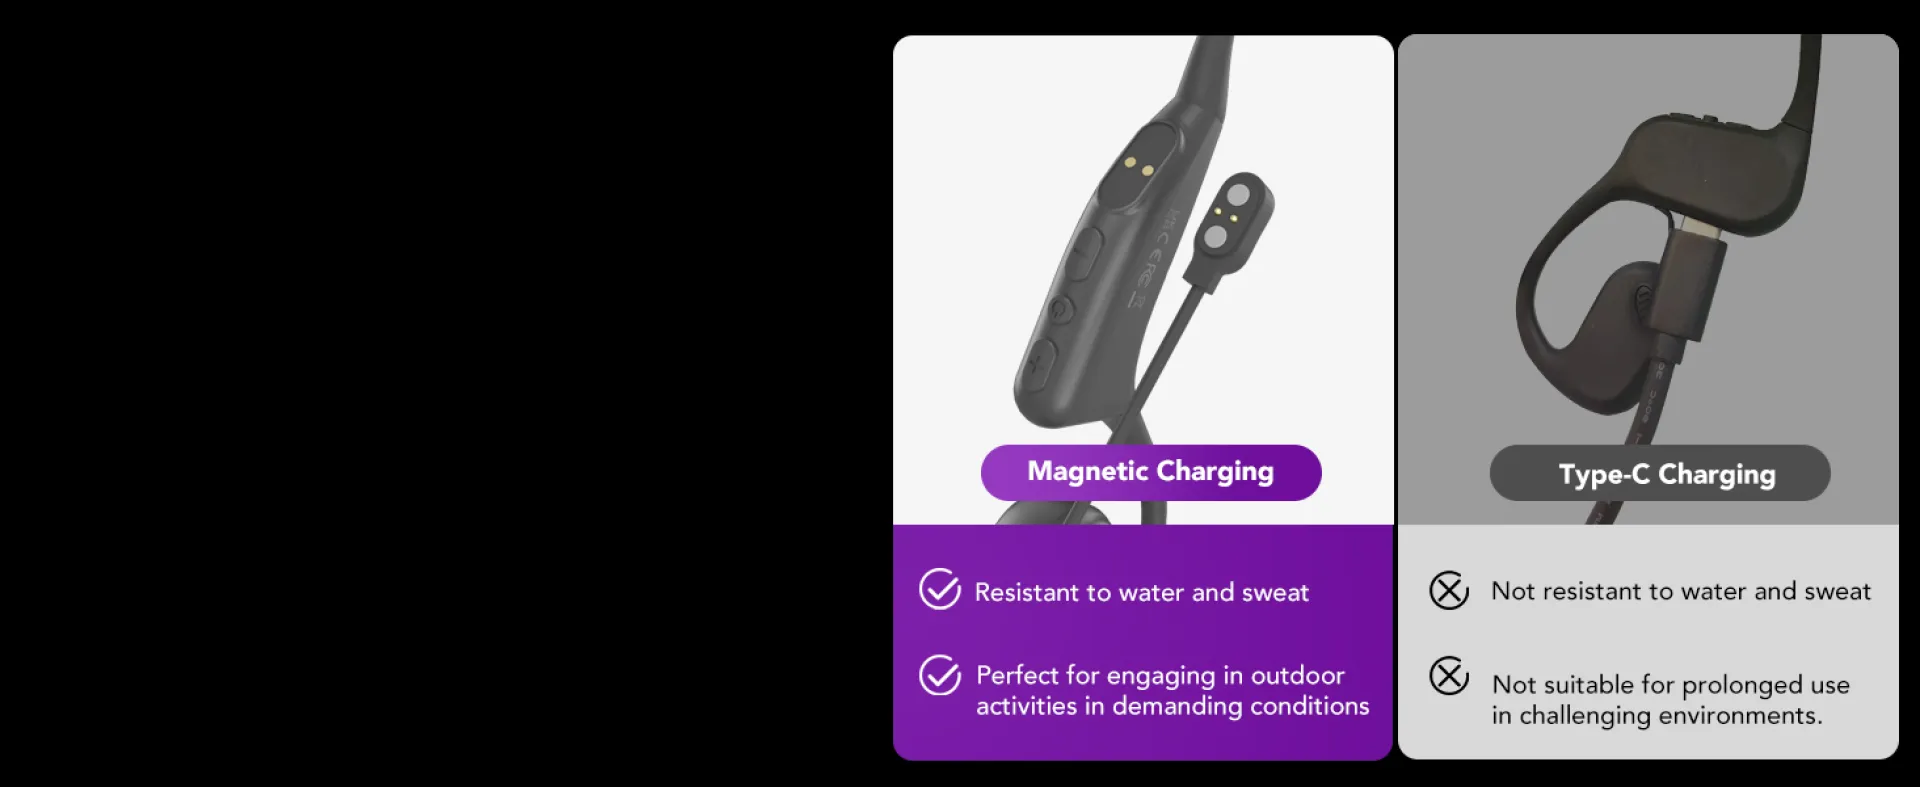 Magnetic Charging